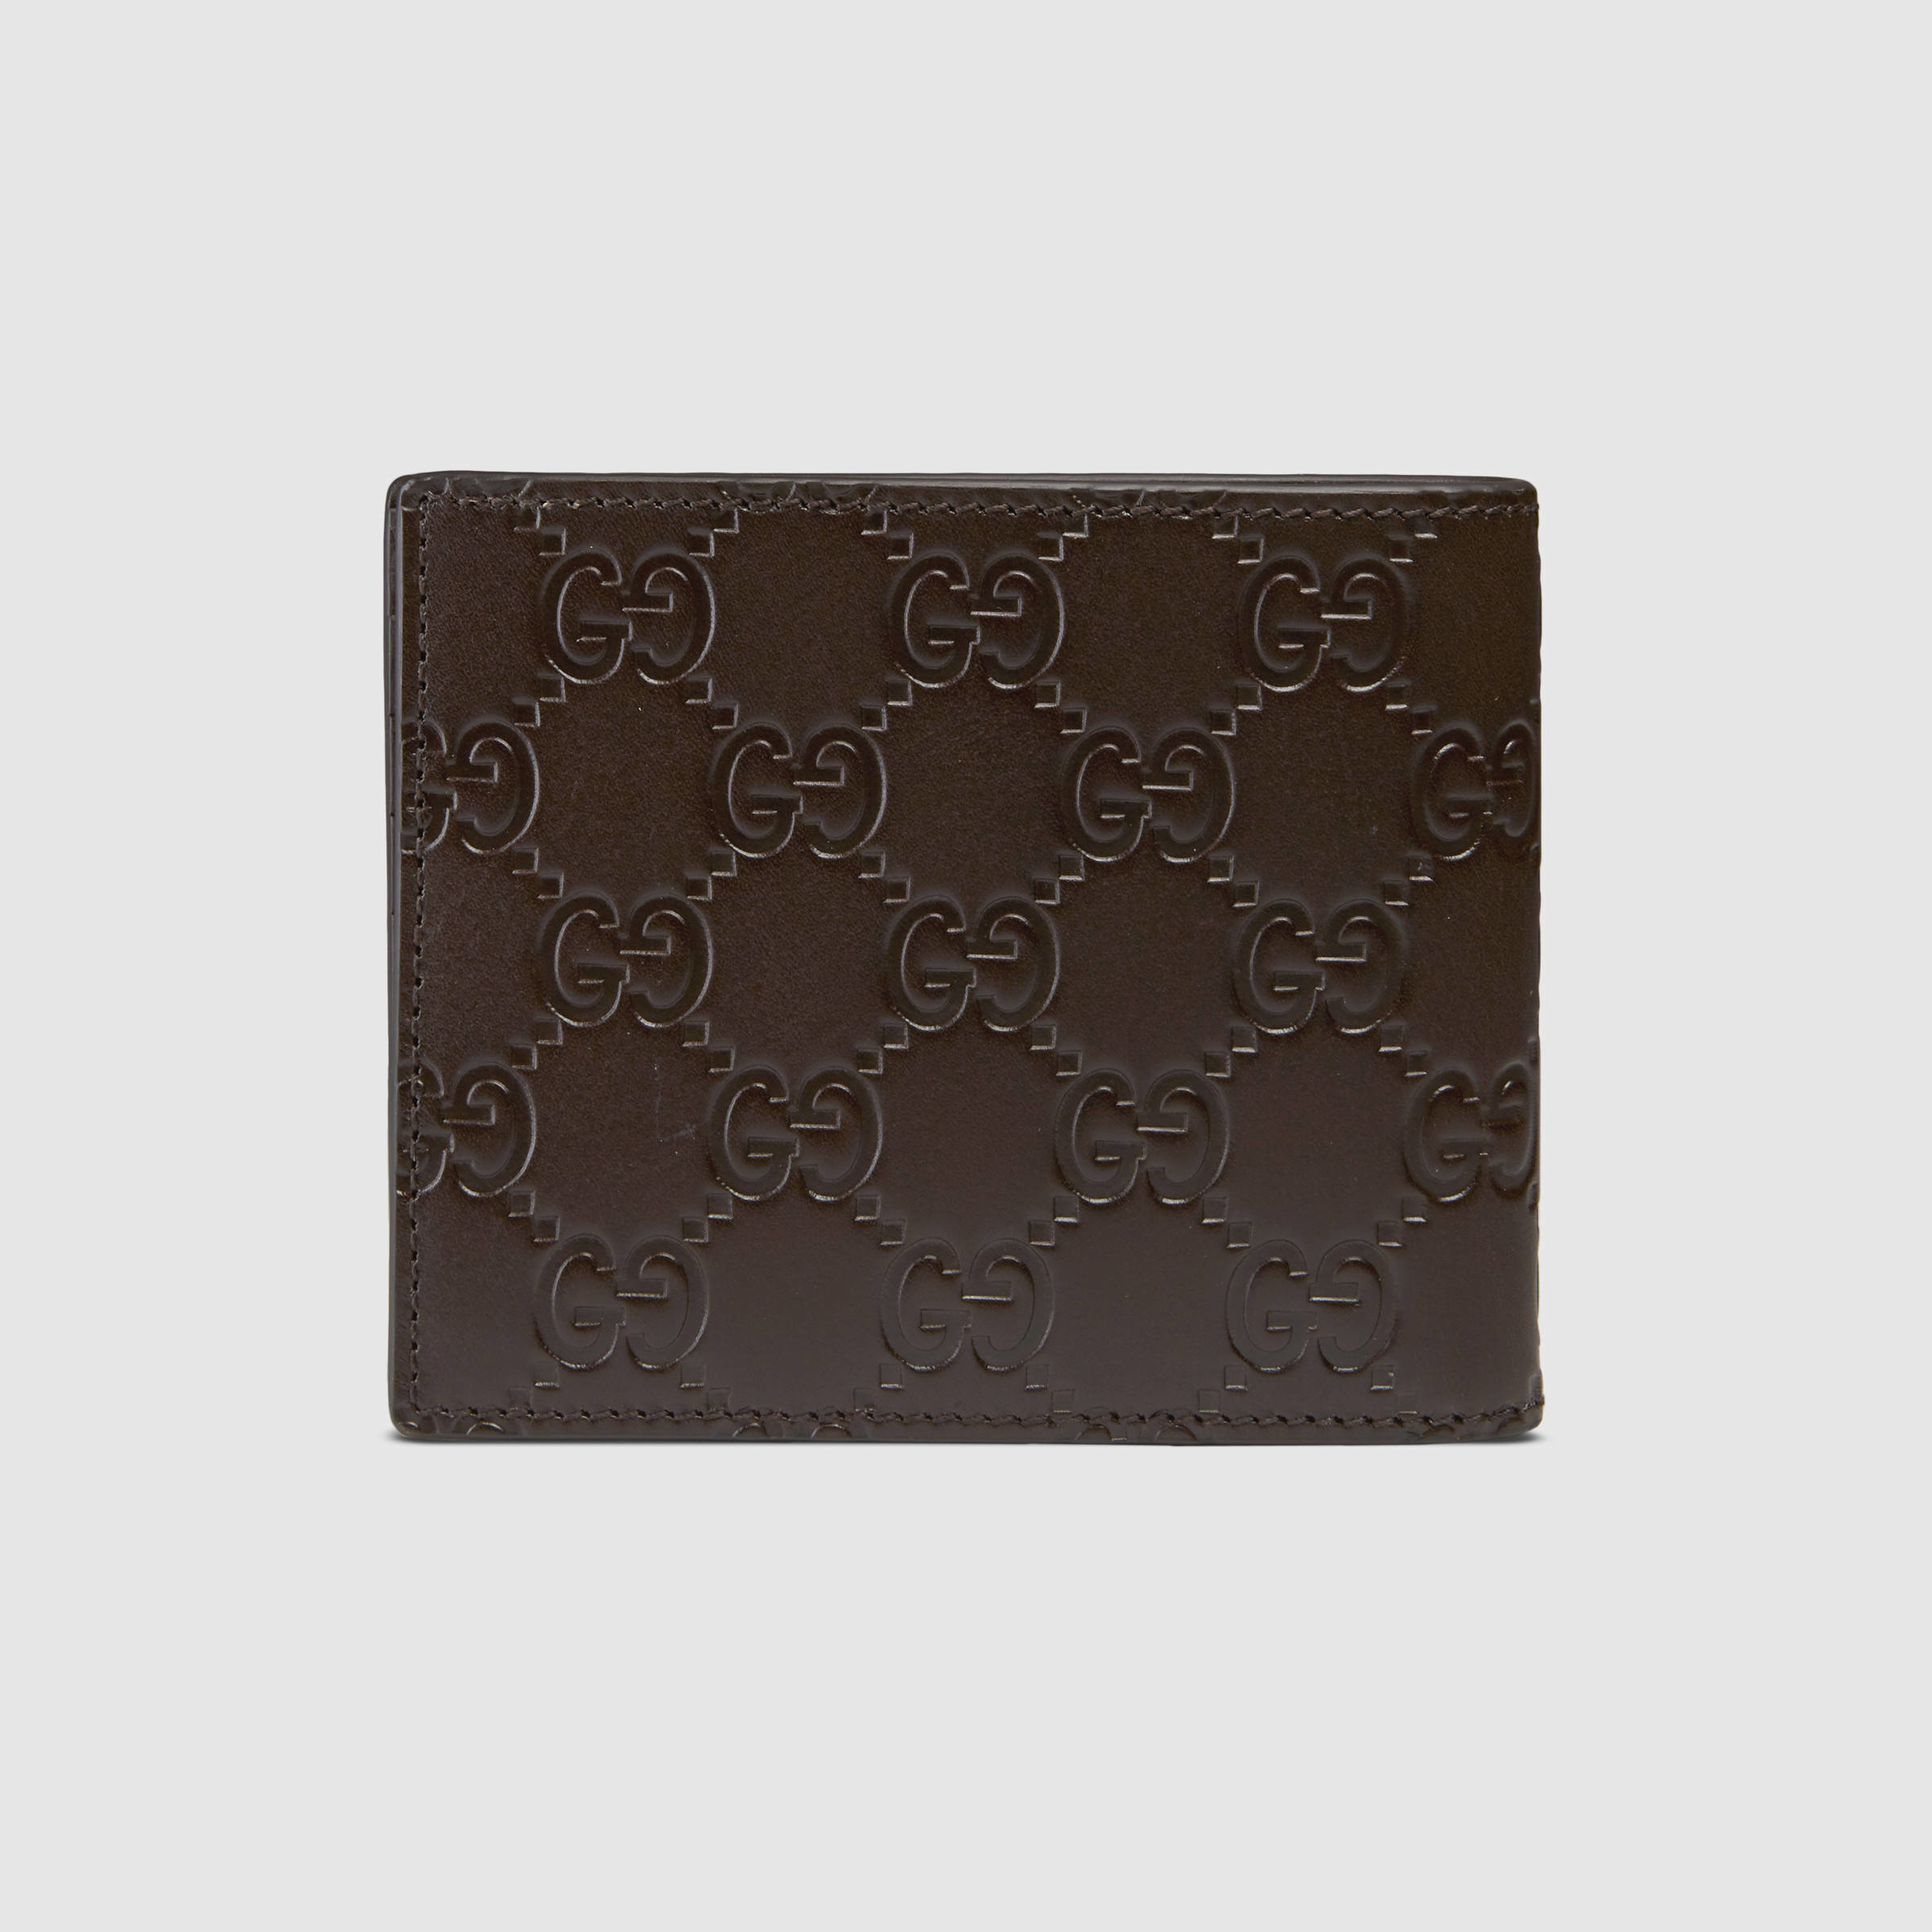 Lyst - Gucci Signature Money Clip Wallet in Brown for Men